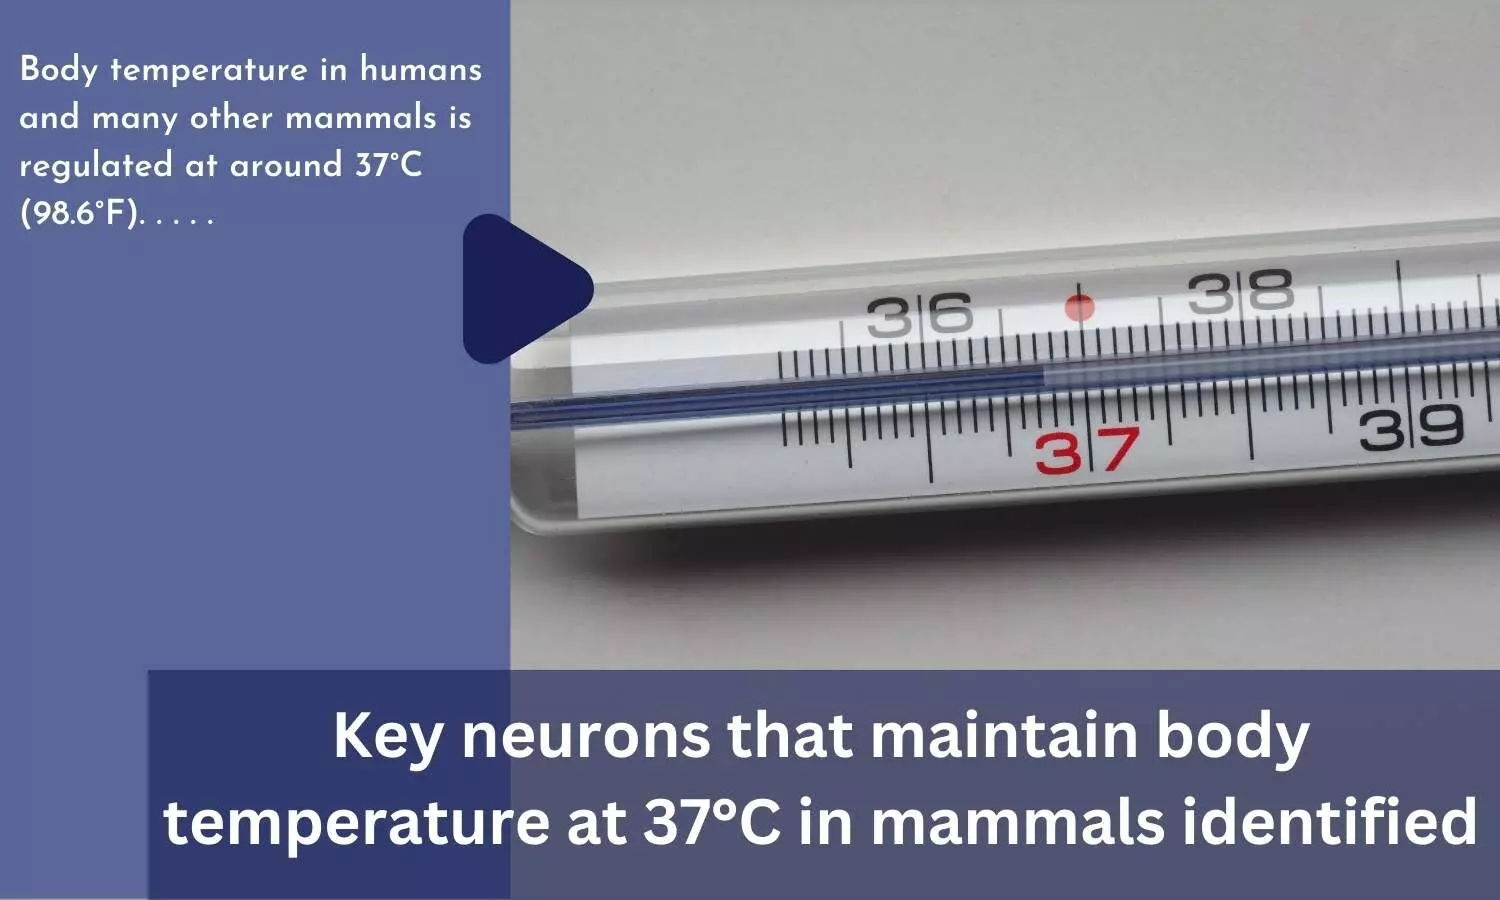 Key neurons that maintain body temperature at 37°C in mammals identified